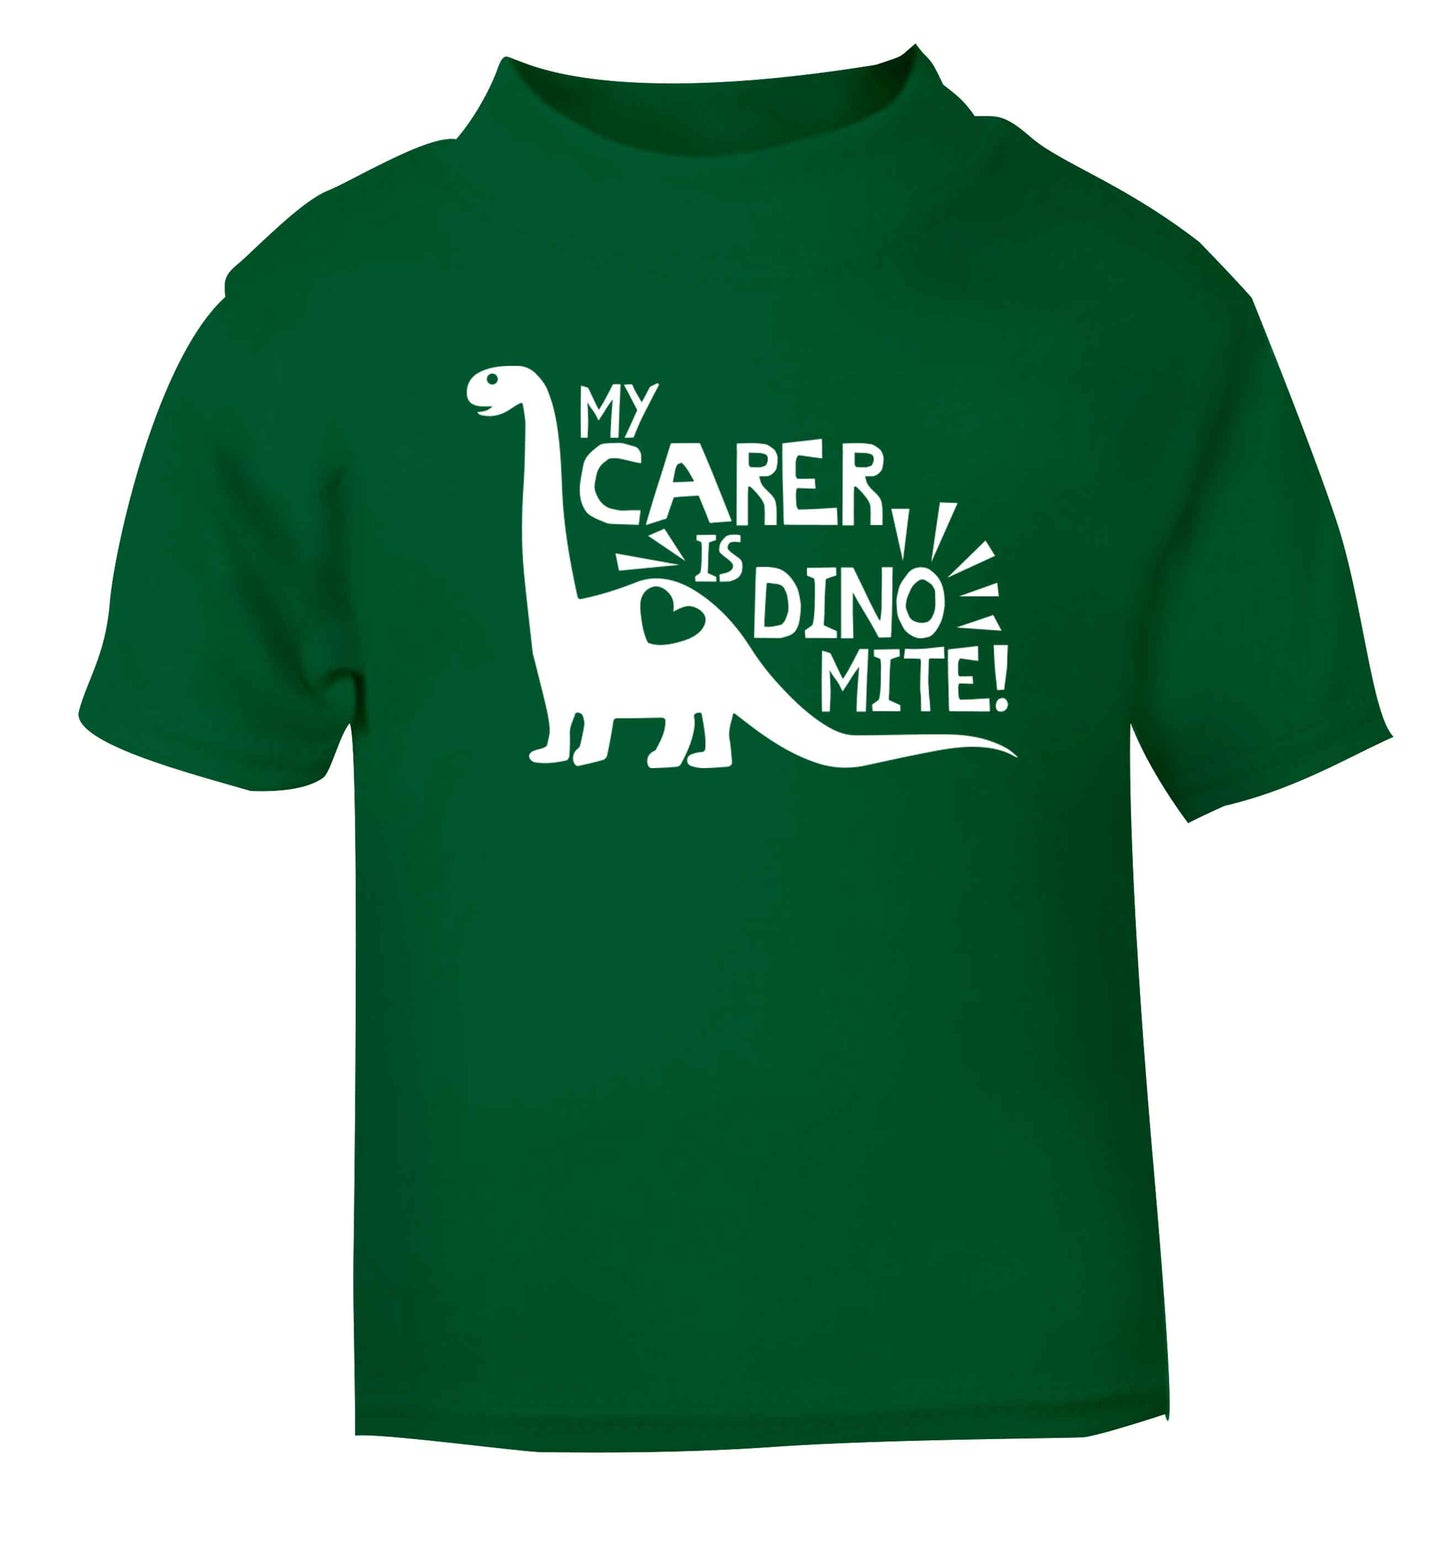 My carer is dinomite! green Baby Toddler Tshirt 2 Years